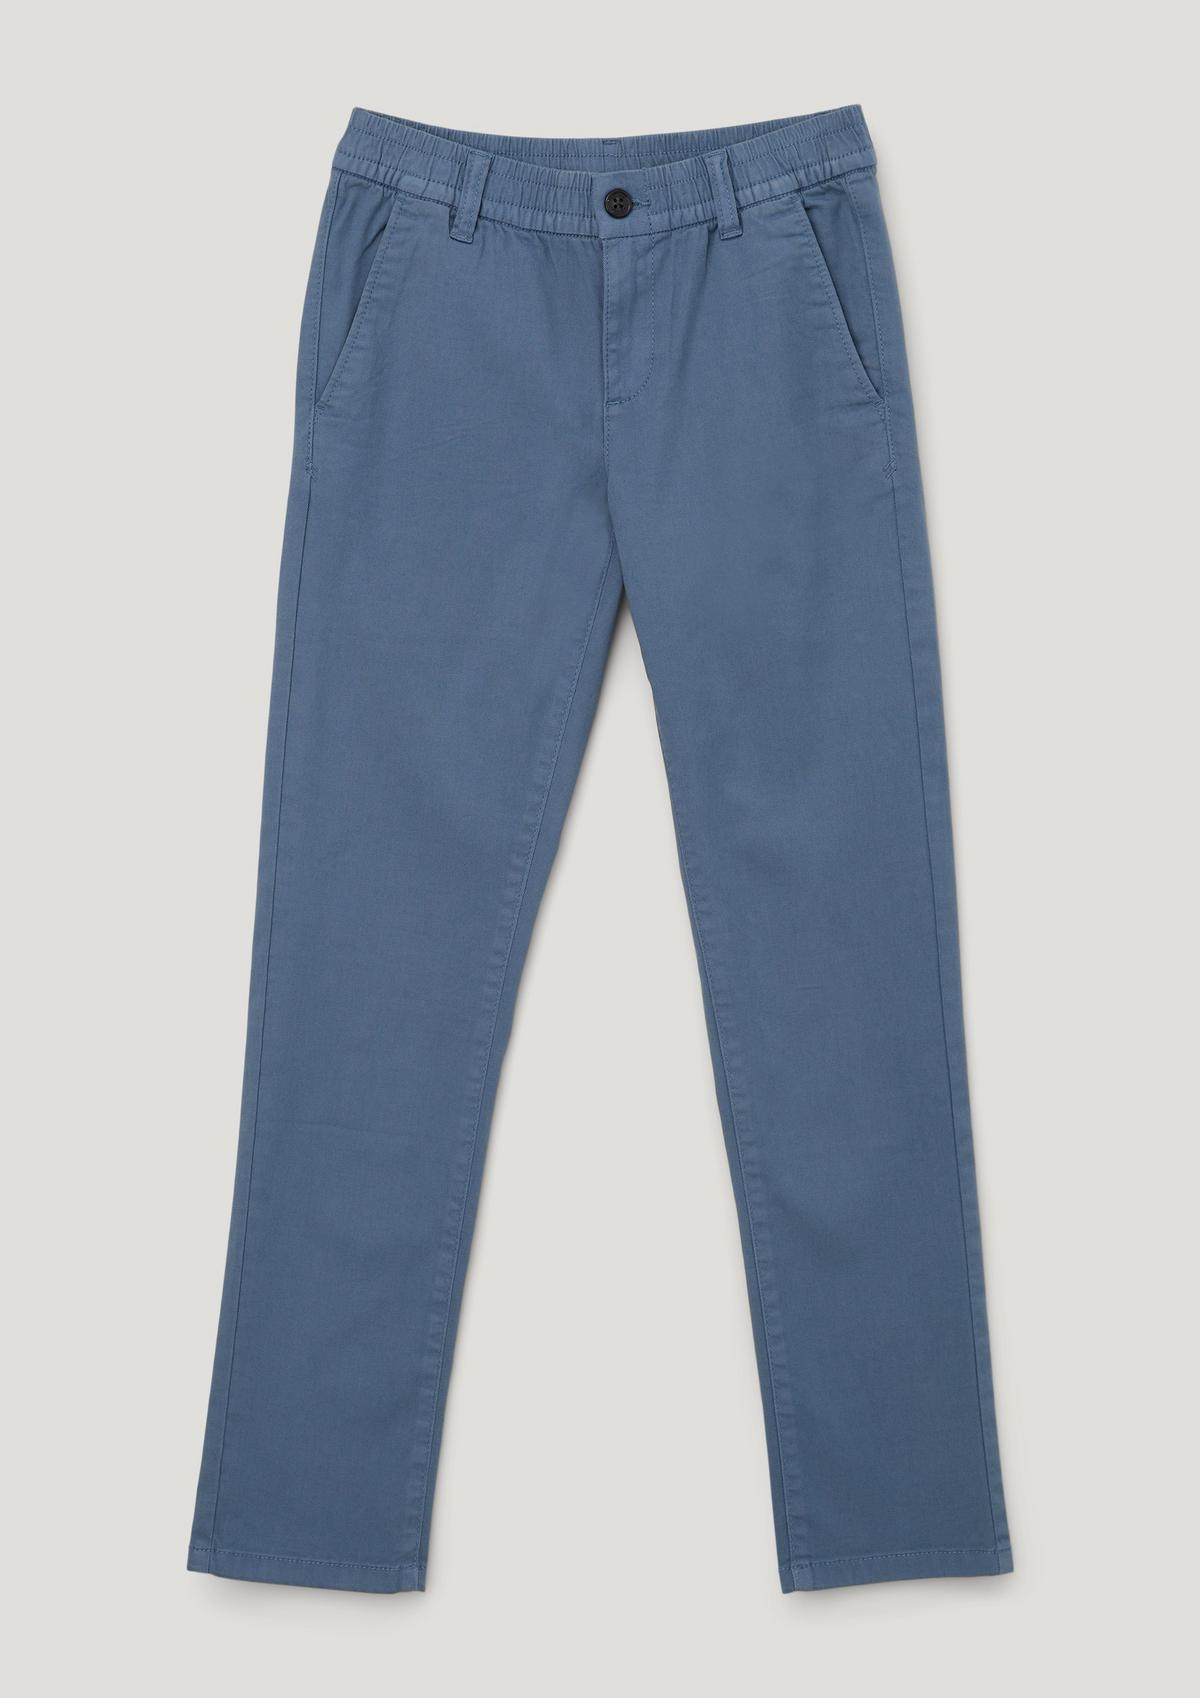 Chinos: trousers with a dobby texture